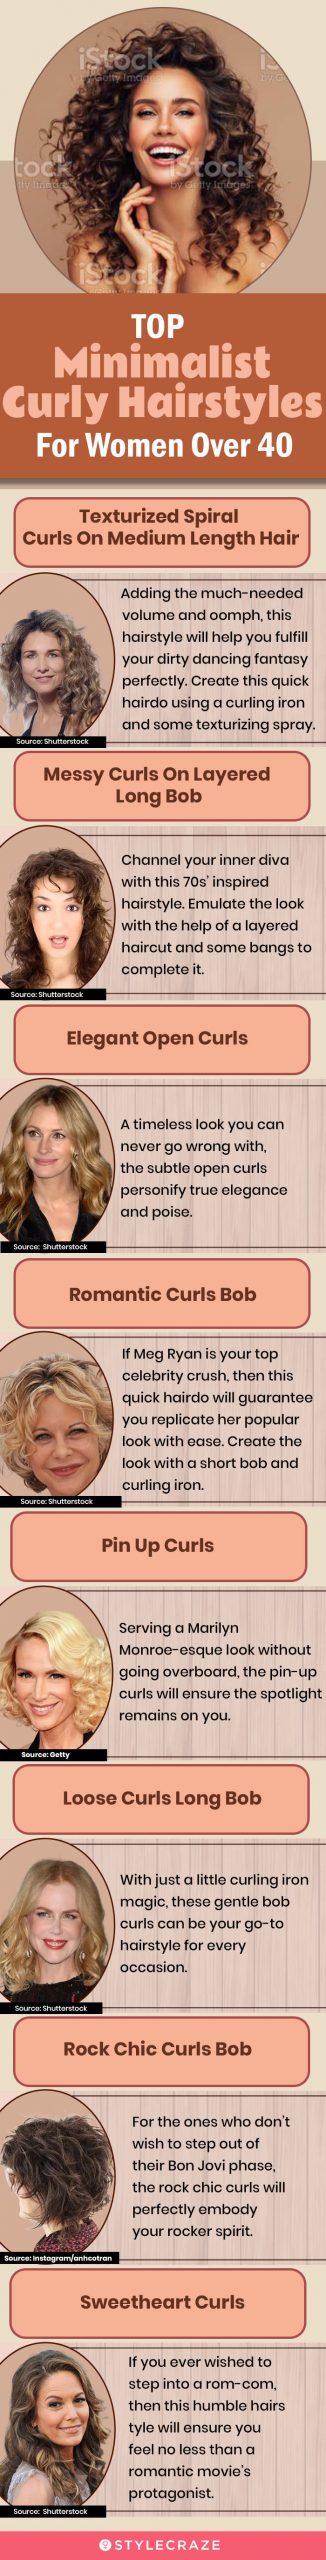 Top Minimalist Curly Hairstyles For Women Over 40 [infographic]